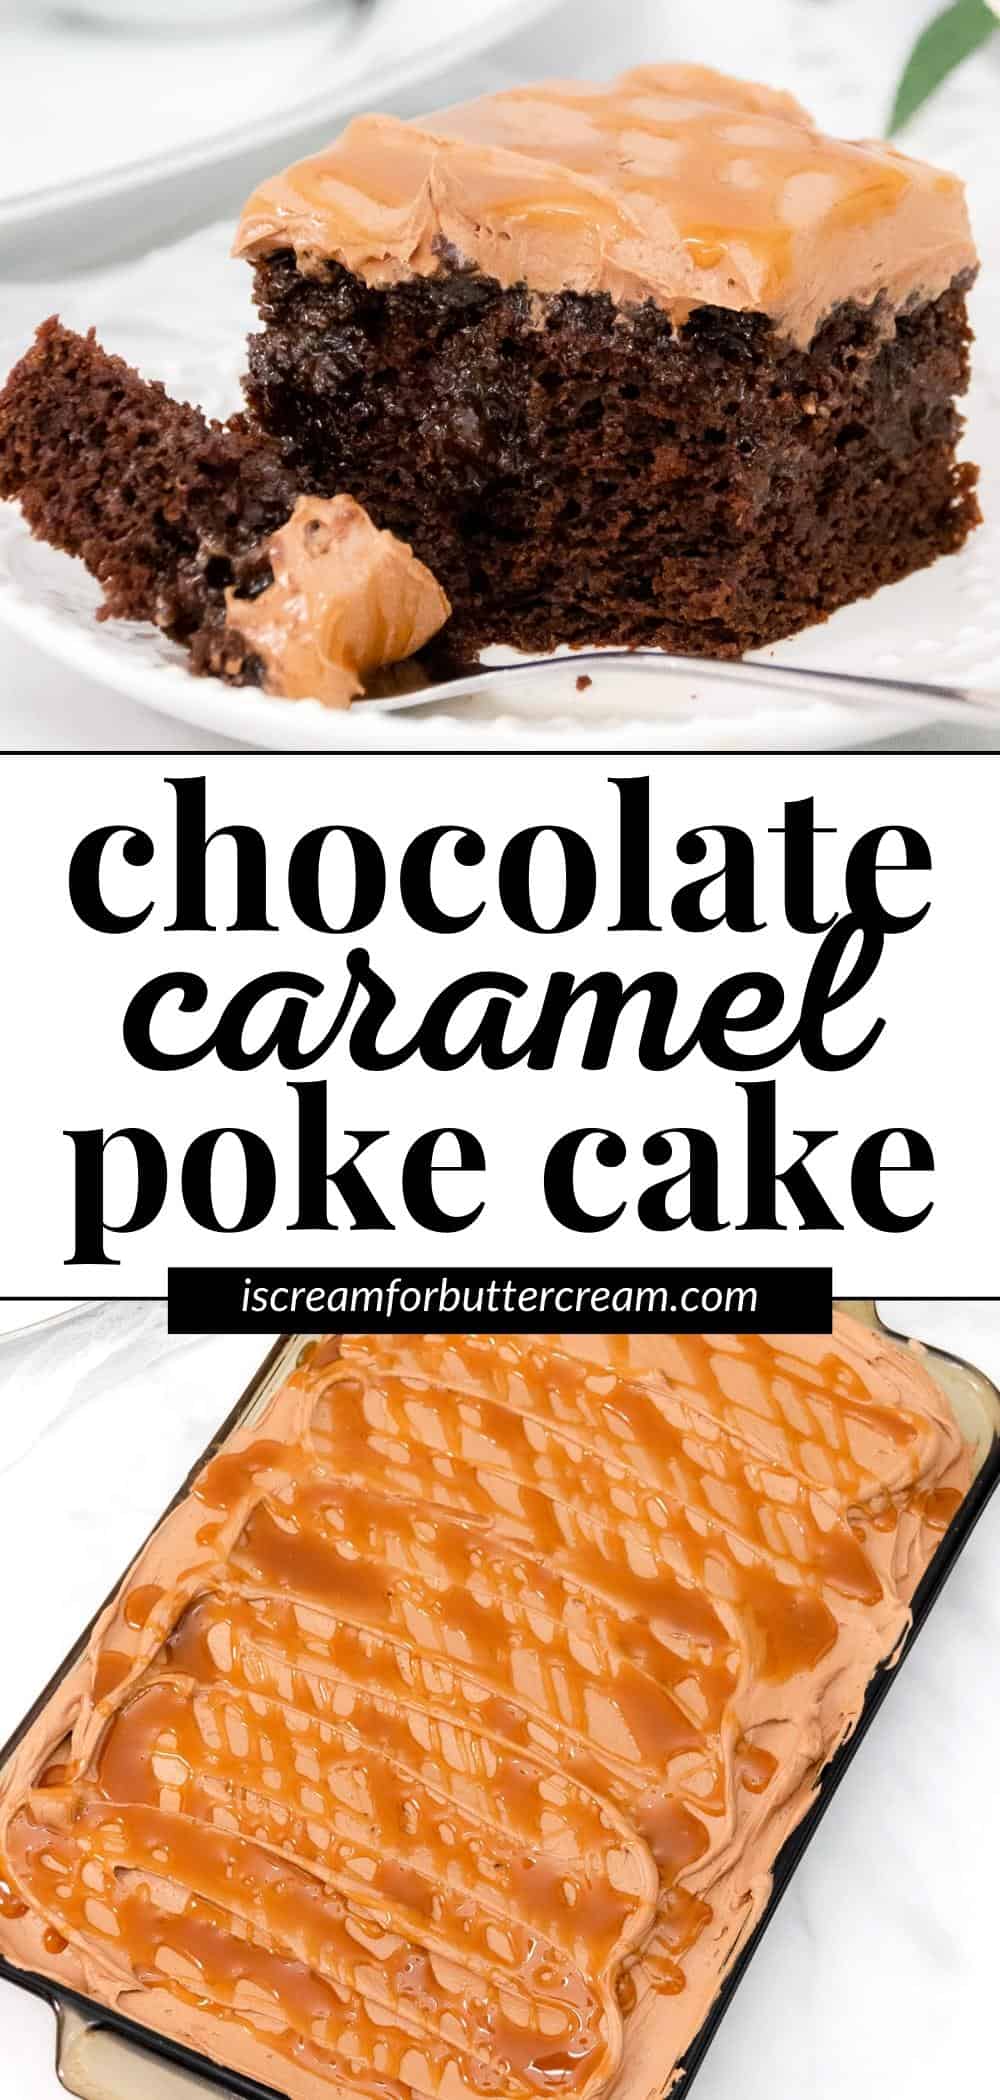 Large slice of caramel poke cake with a fork and text.